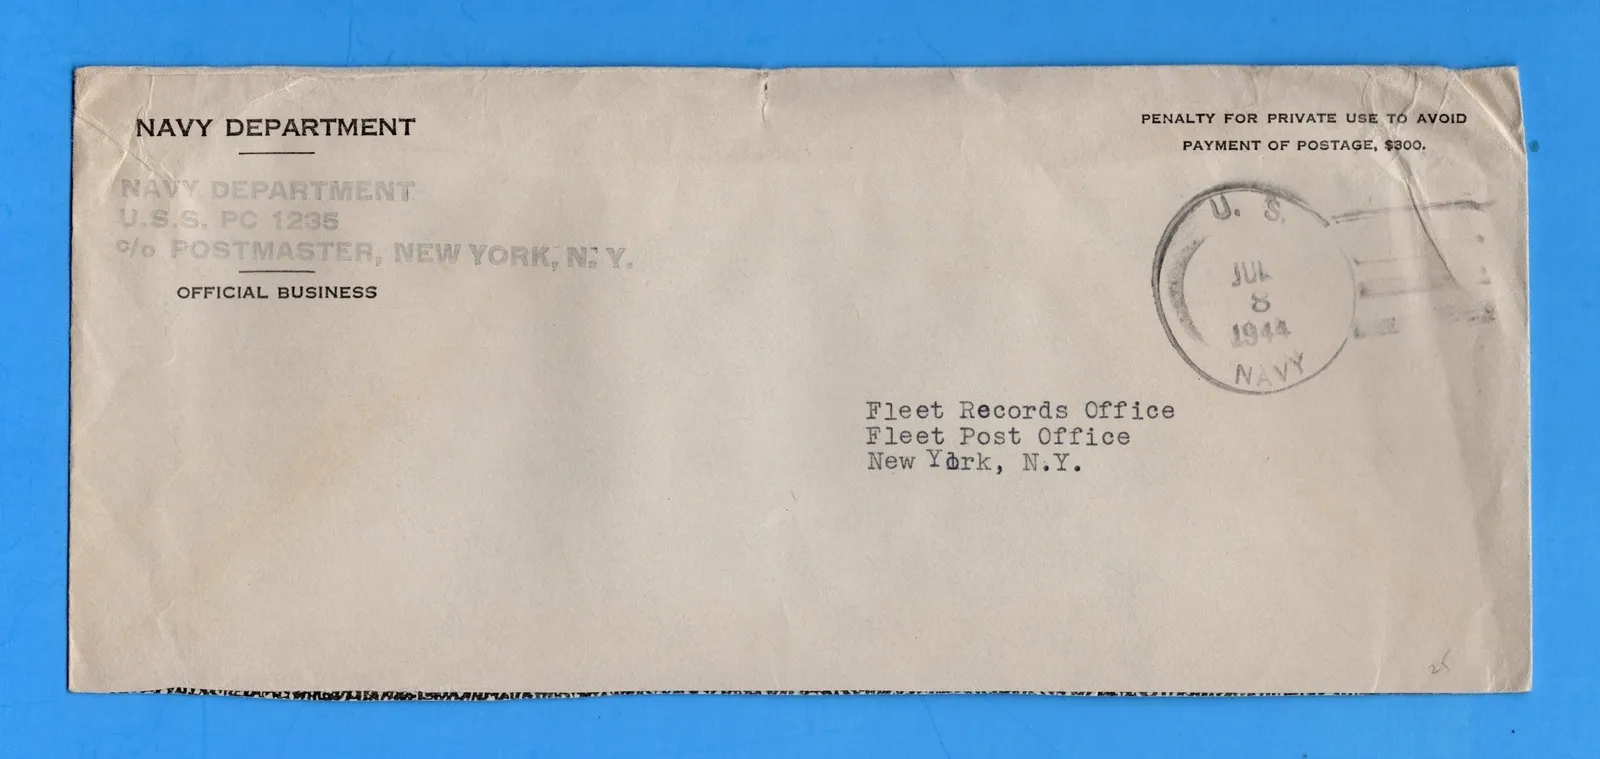 Submarine Chaser USS PC-1235 Navy Department Official Mail July 8, 1944